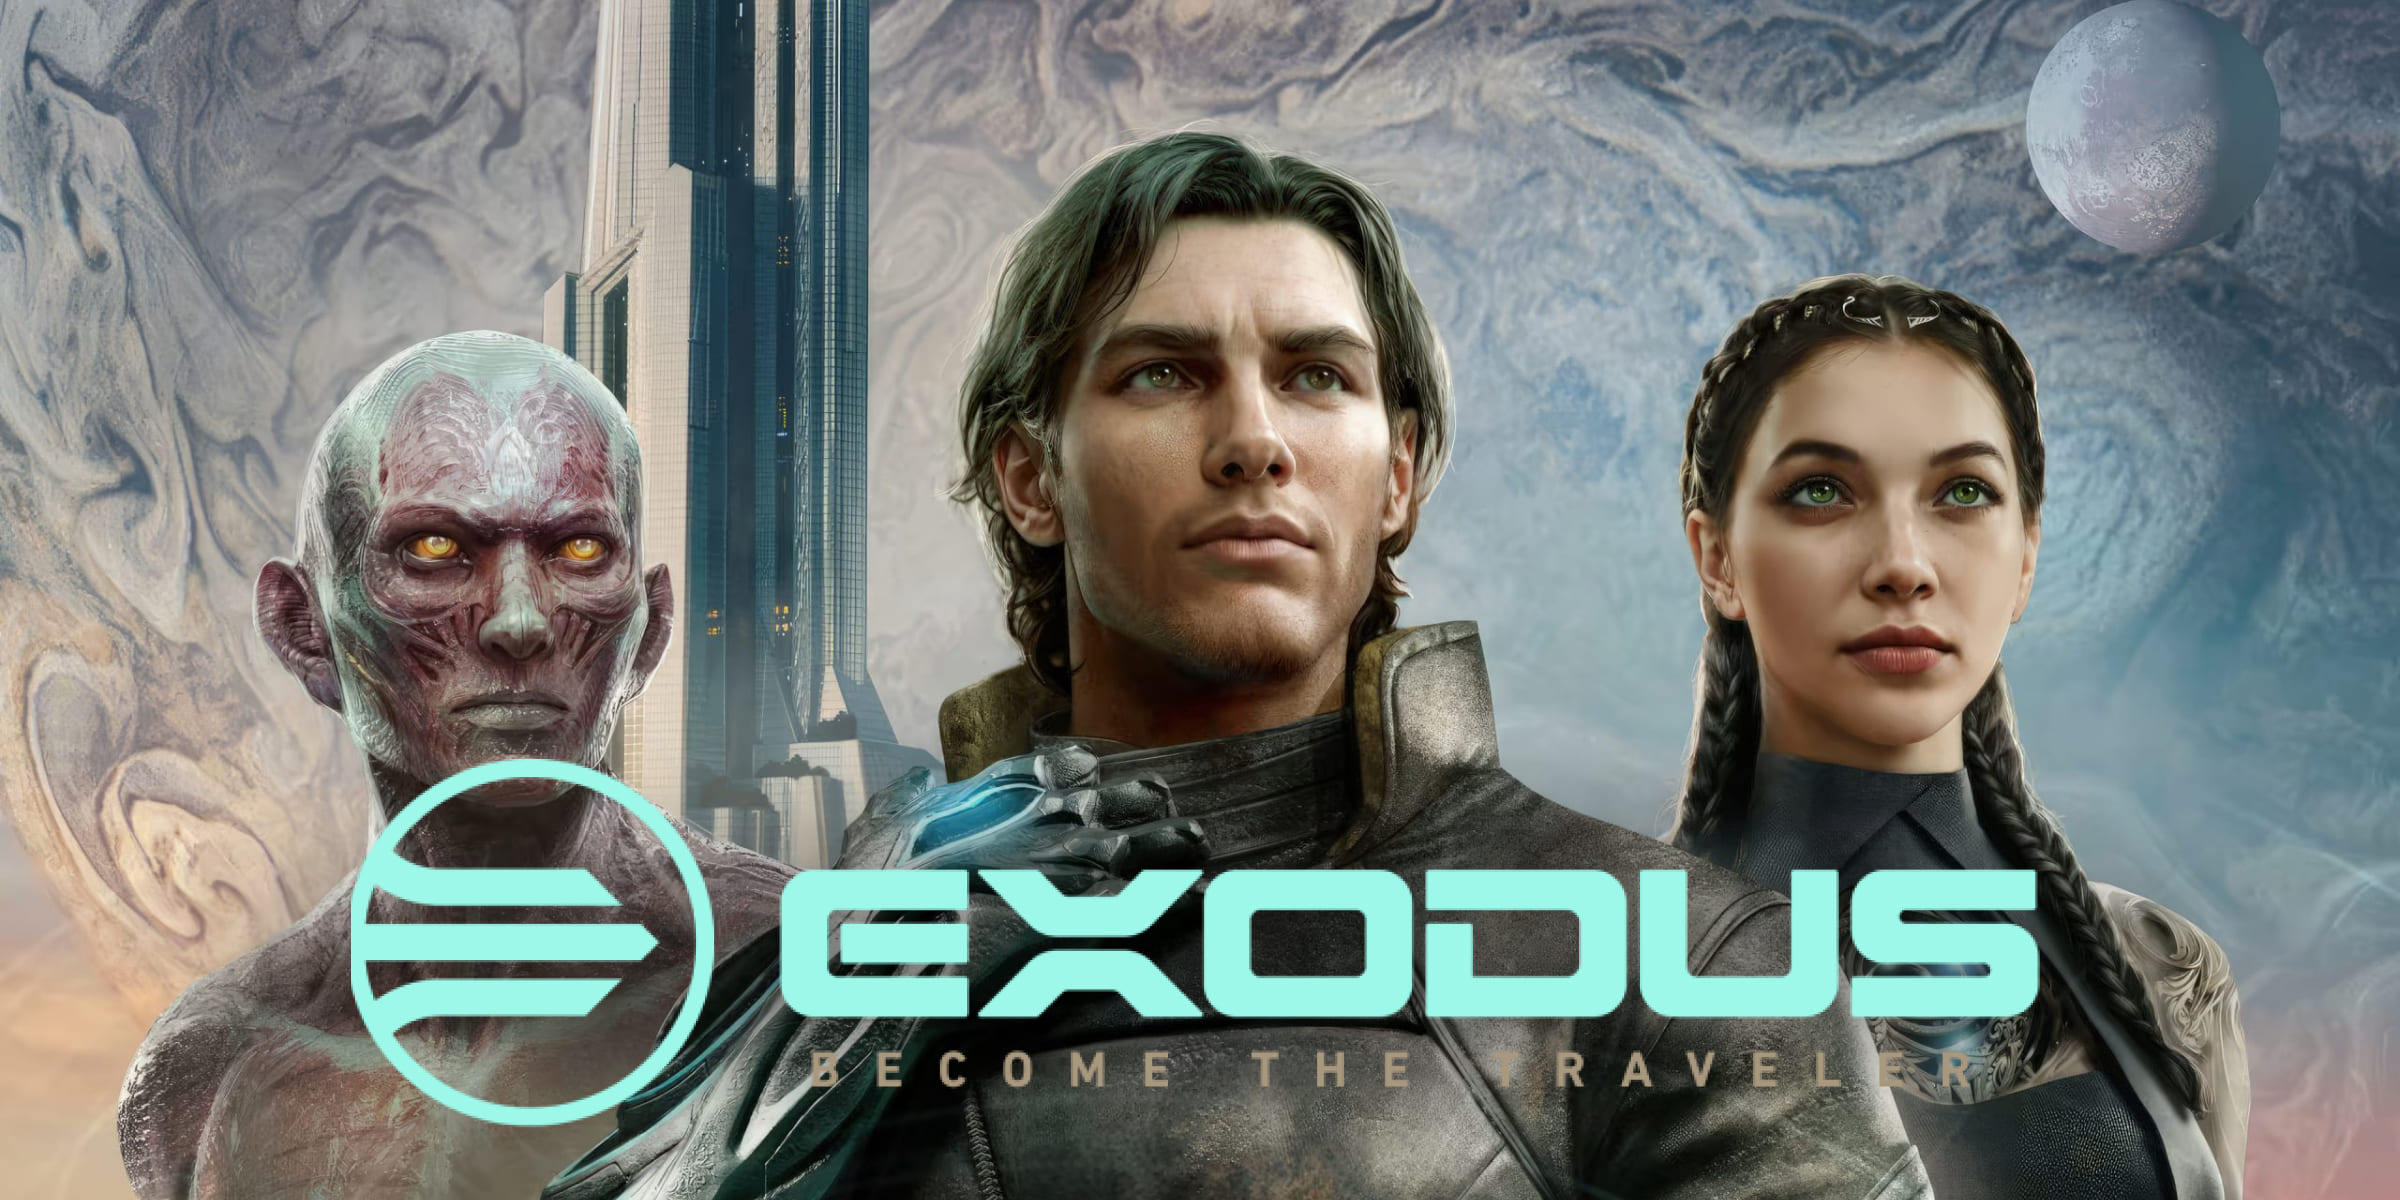 Embark on an Epic Cosmic Quest with Exodus: A Sci-Fi RPG from the Minds Behind Mass Effect